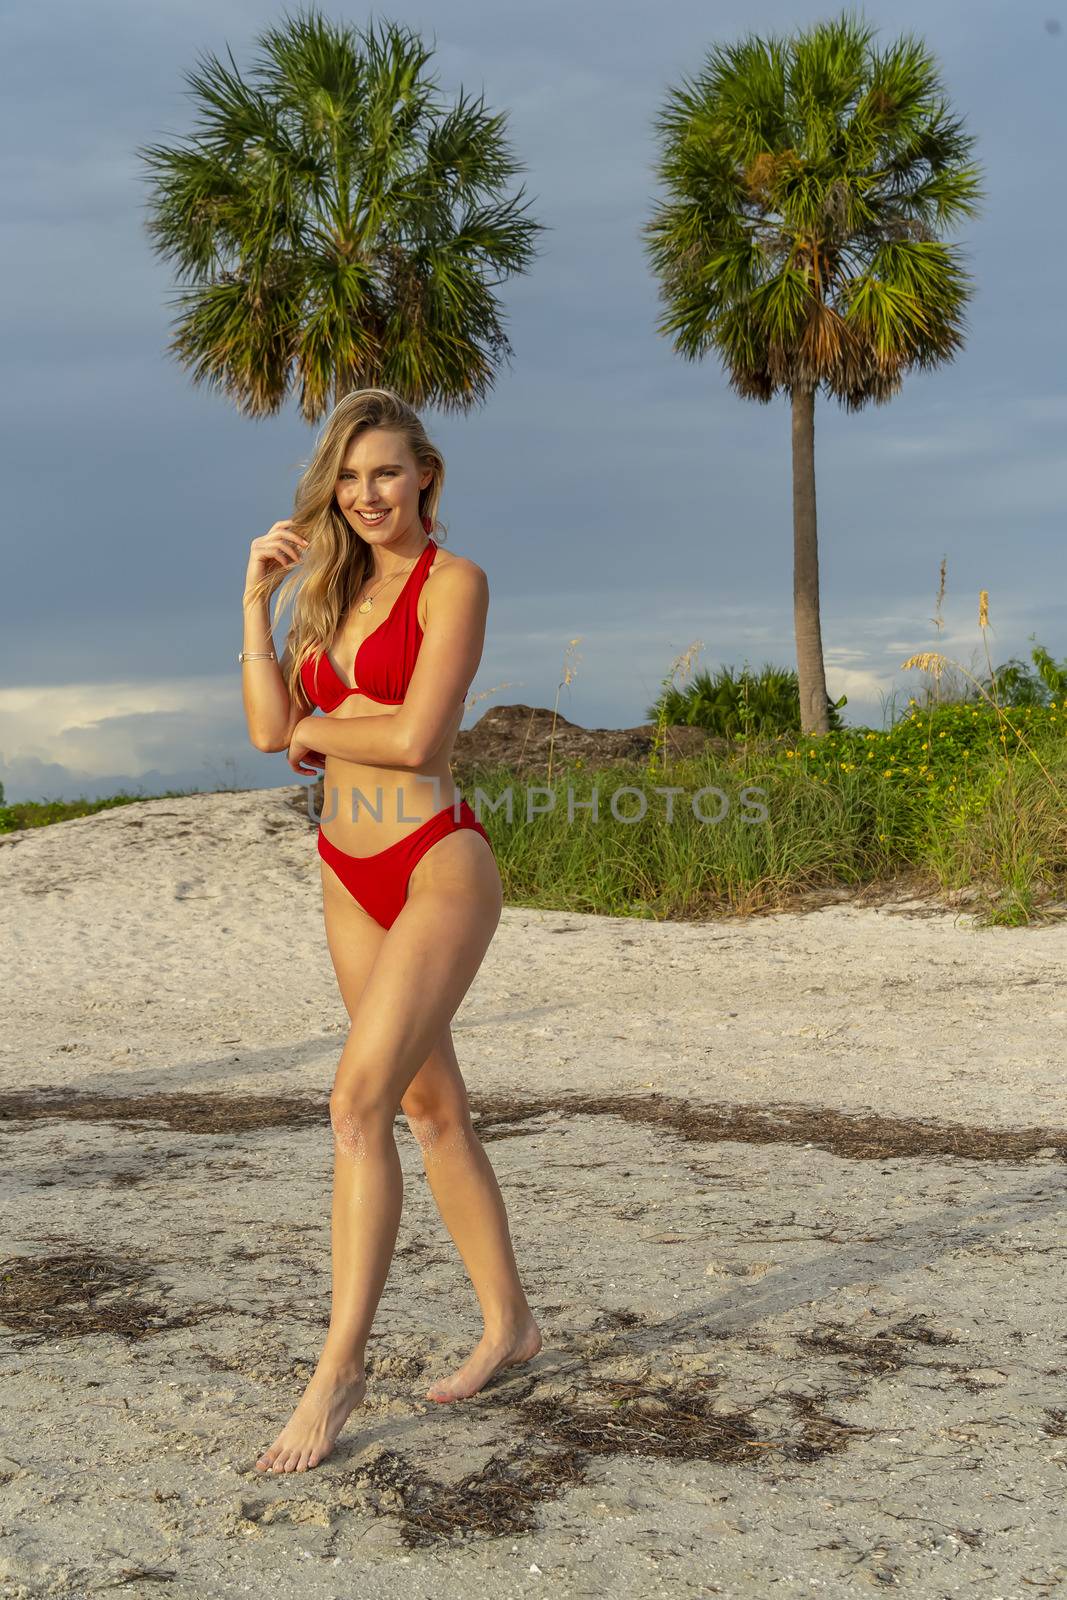 Lovely Blonde Bikini Model Posing Outdoors On A Caribbean Beach by actionsports